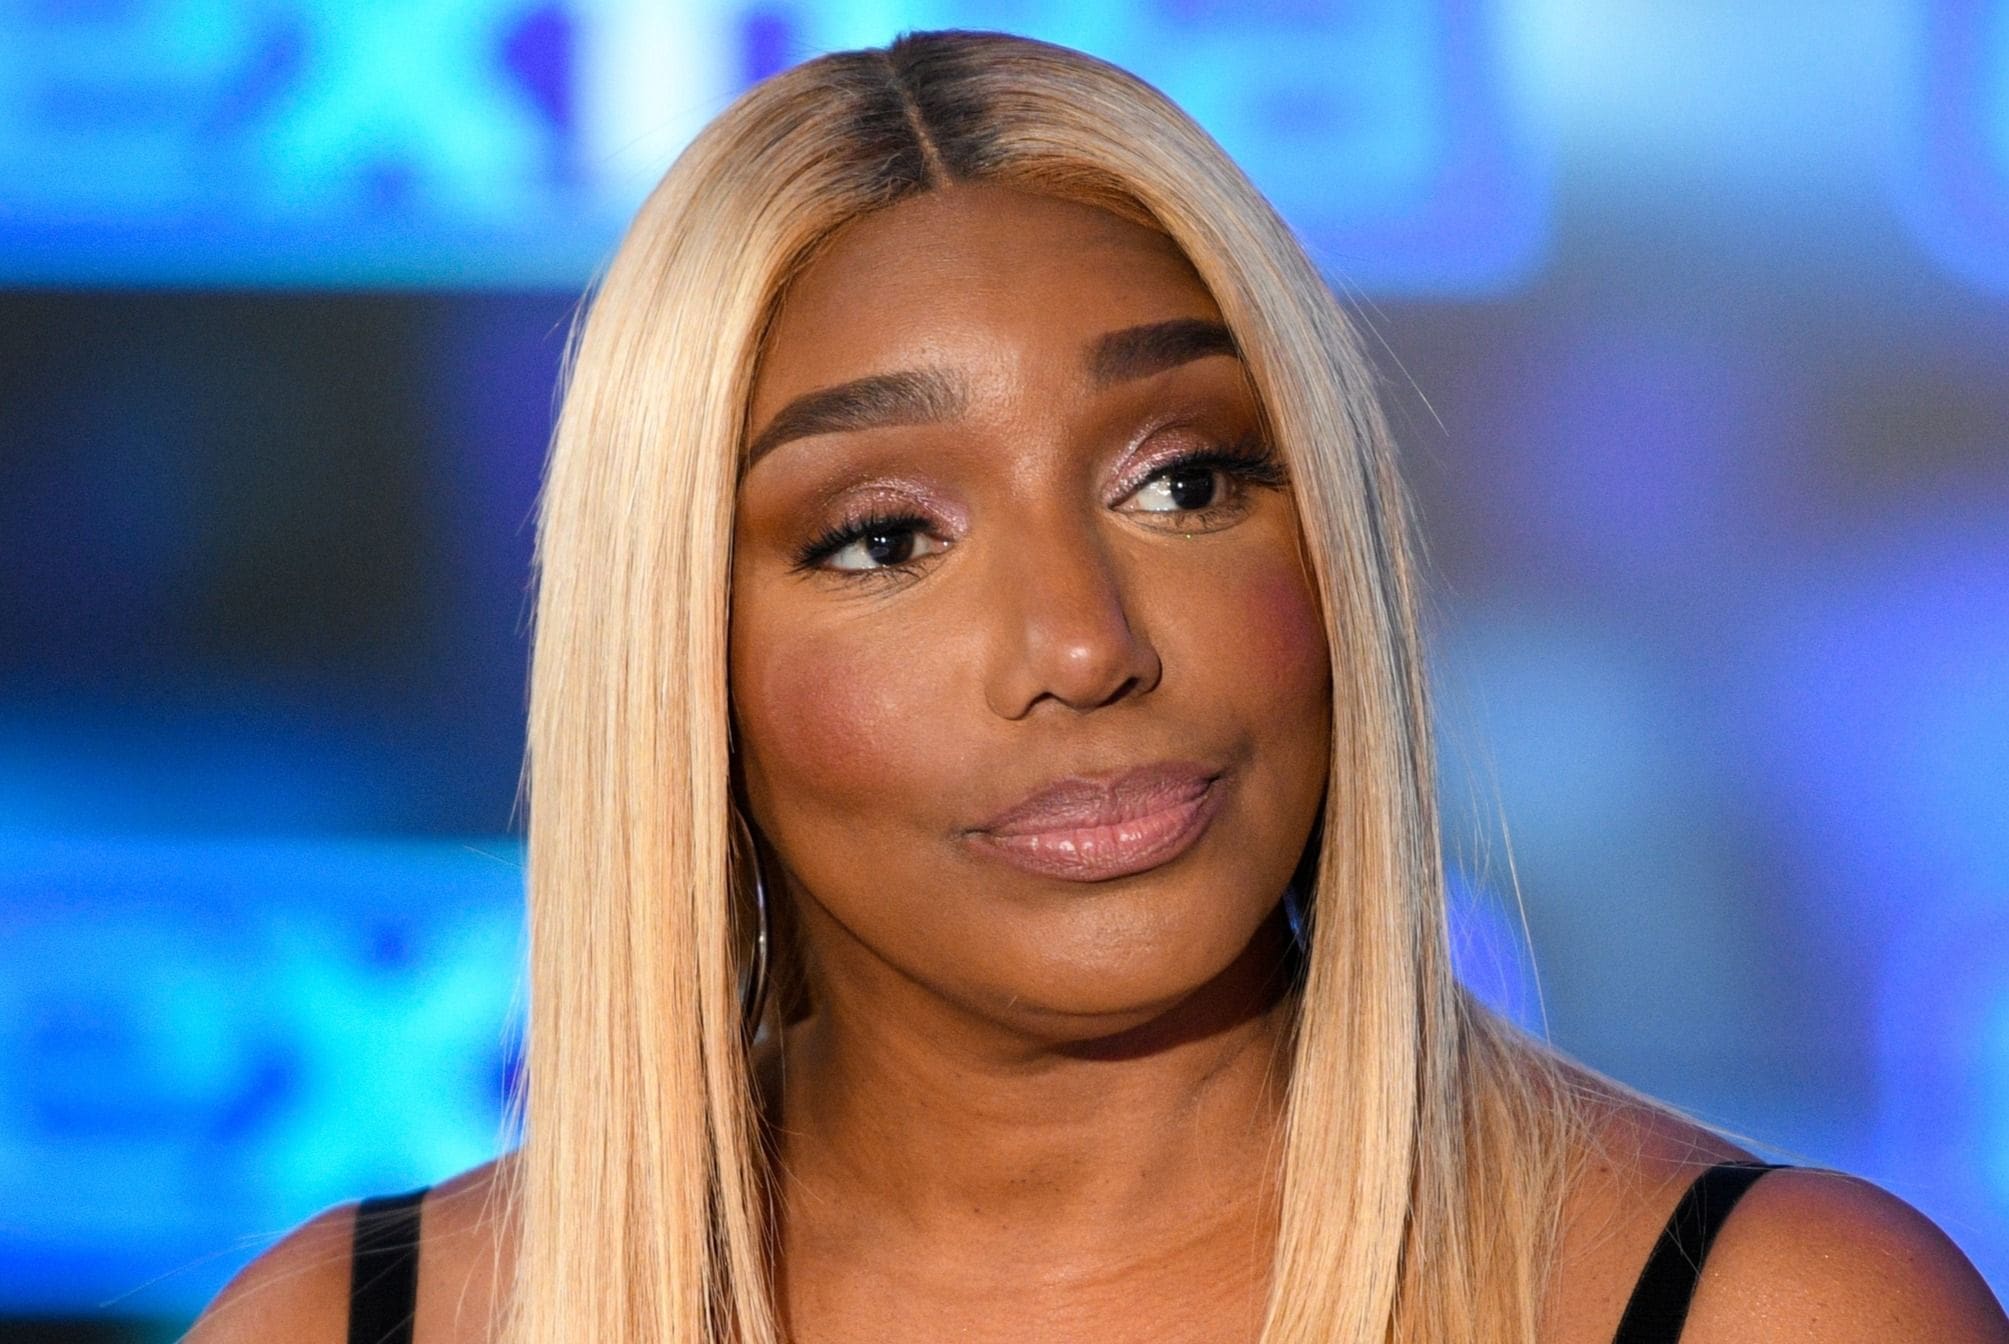 NeNe Leakes Addresses Cicely Tyson's Passing - Check Out Her Post Here